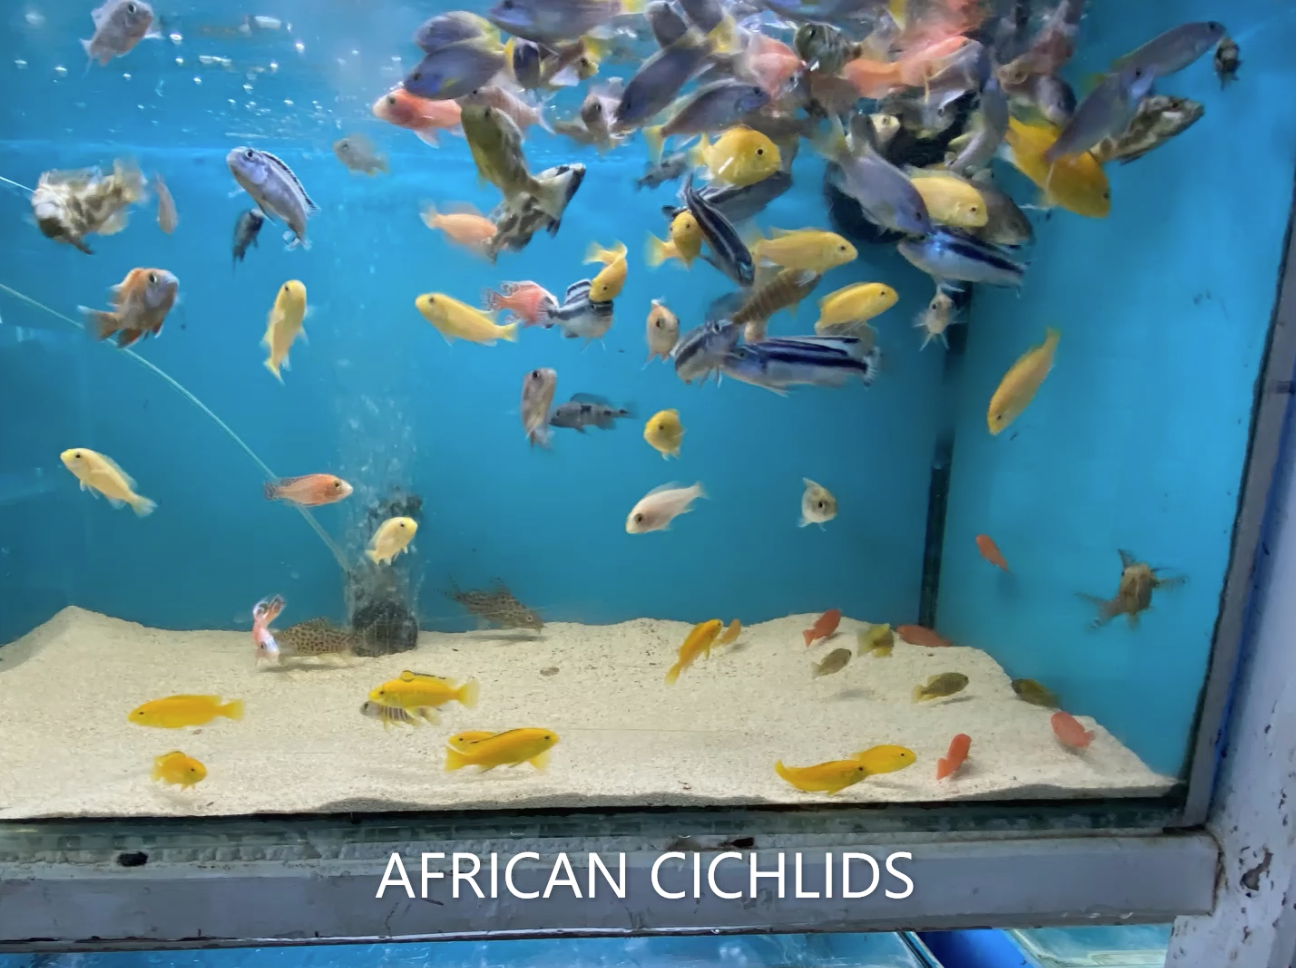 African Cichlids in Display Tanks in Store — Summerland Aquarium in Wollongbar, NSW